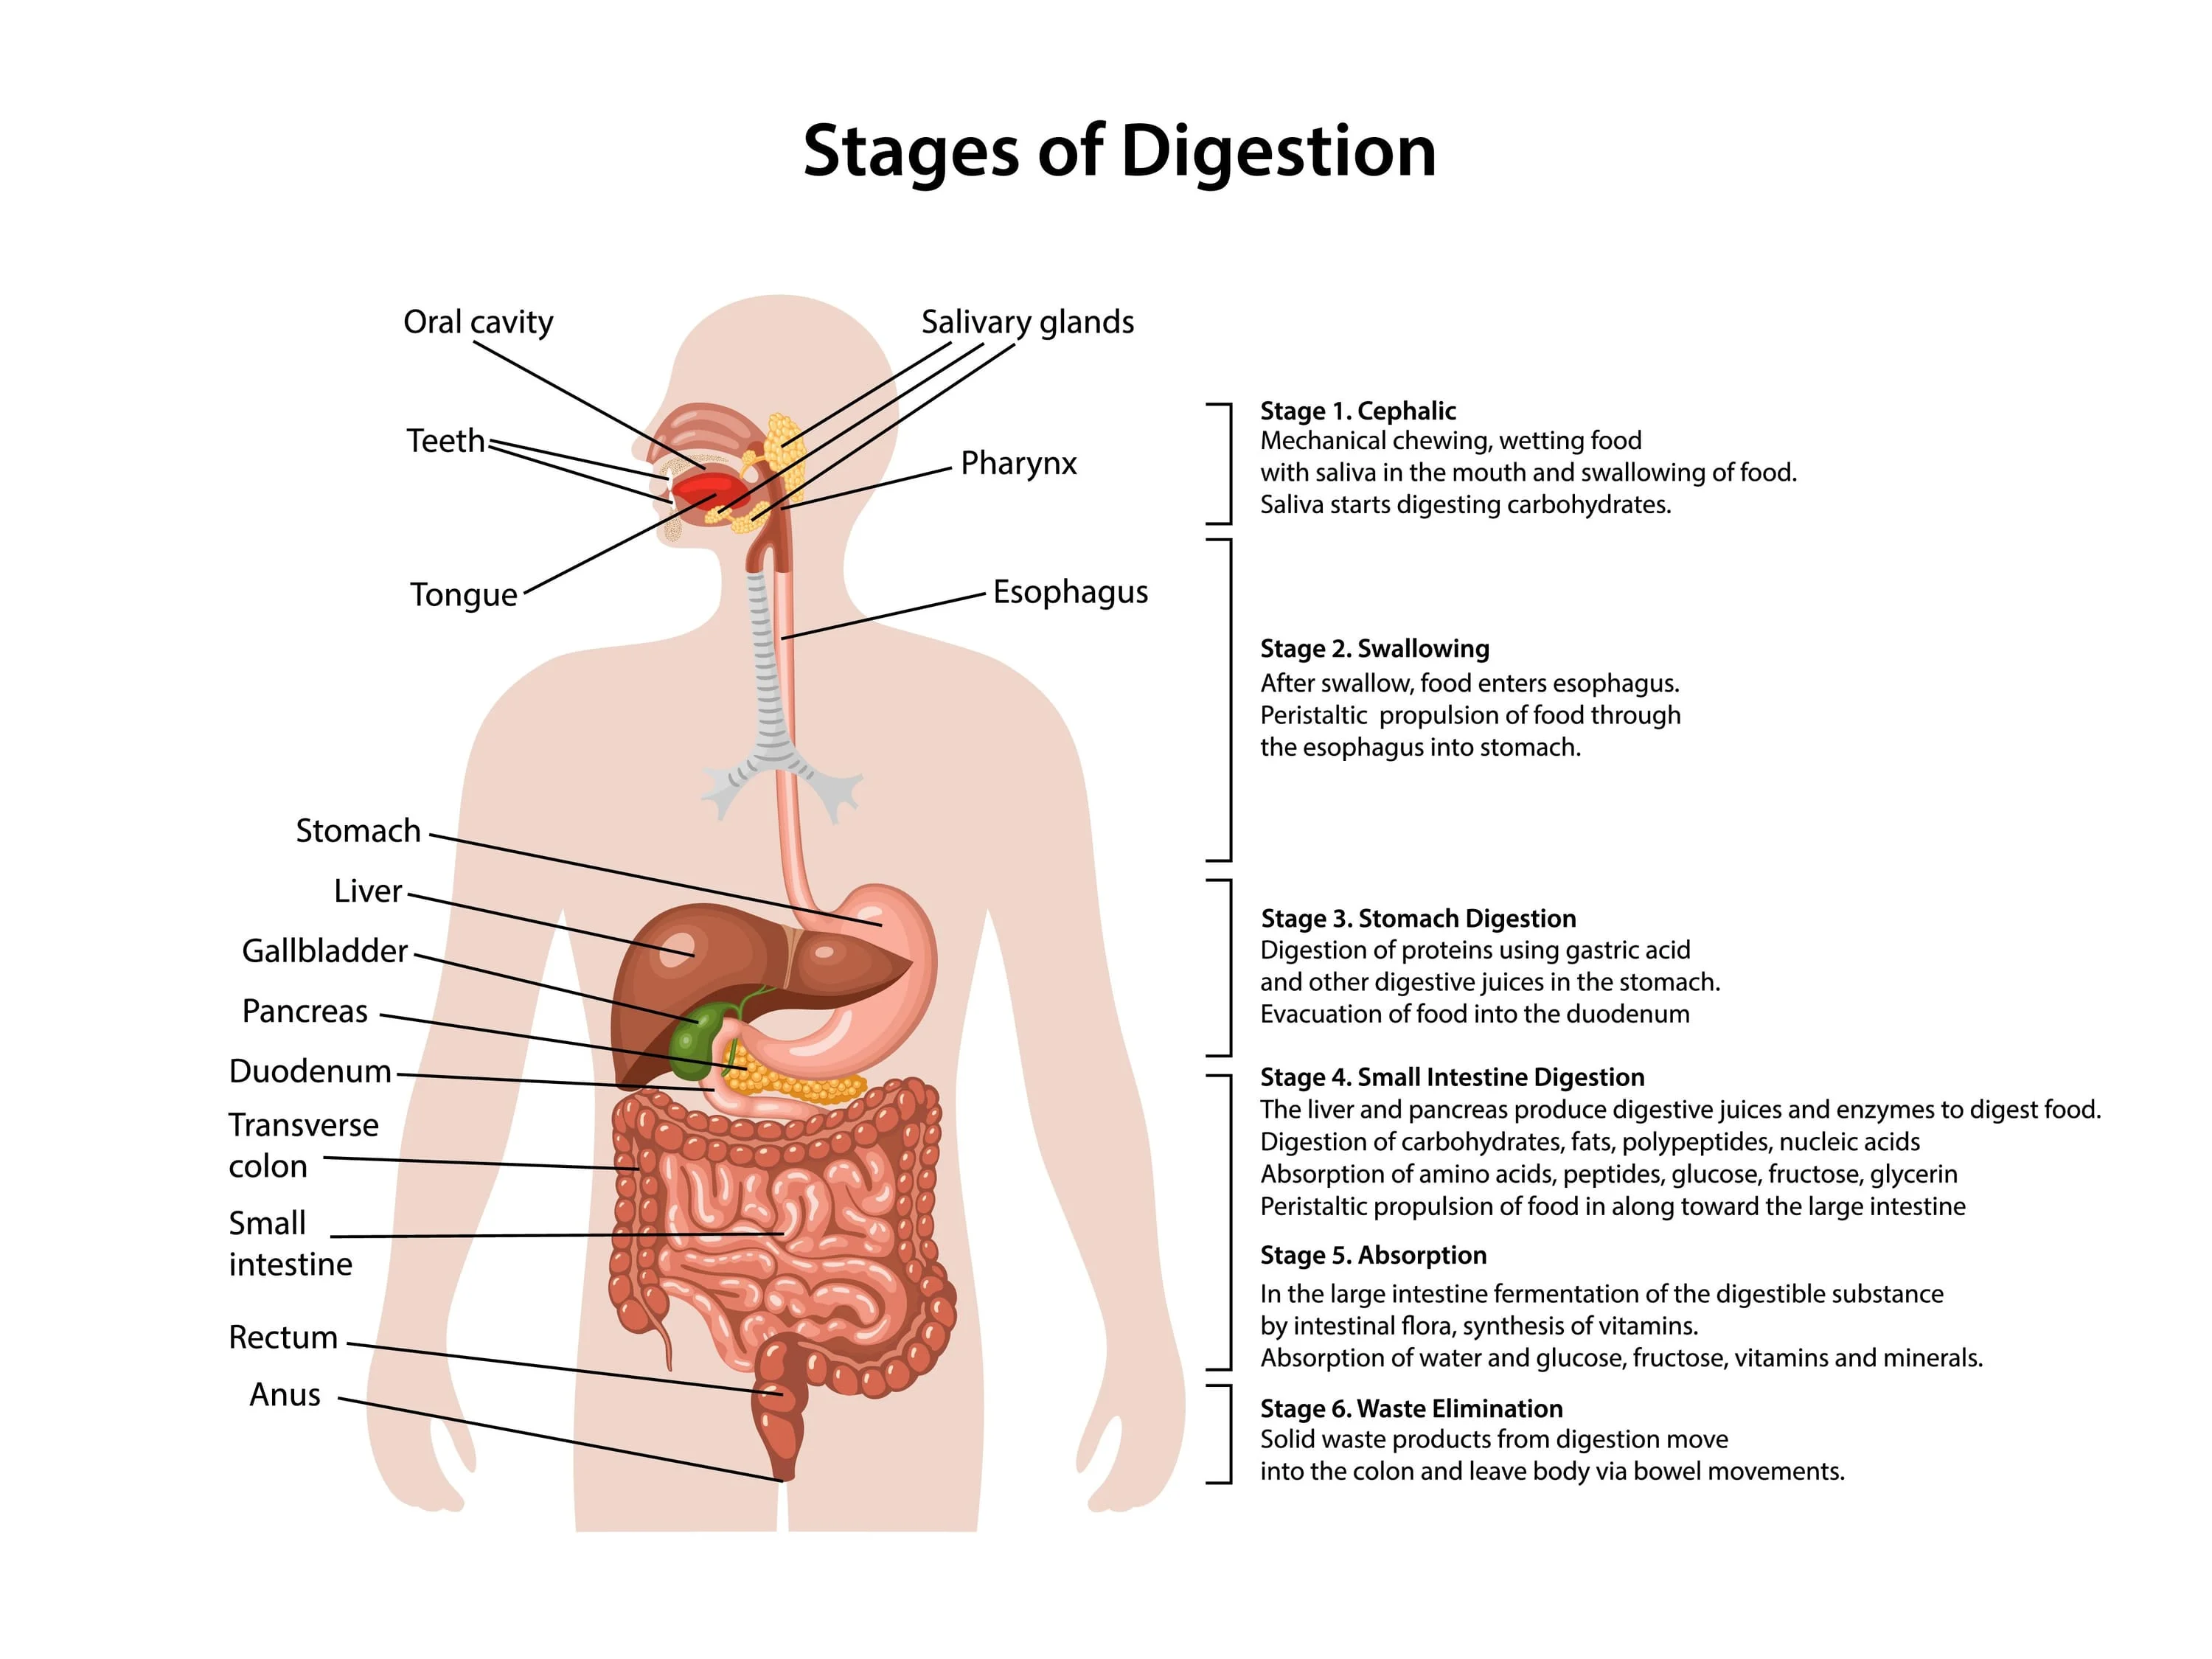 Stages of Digestion